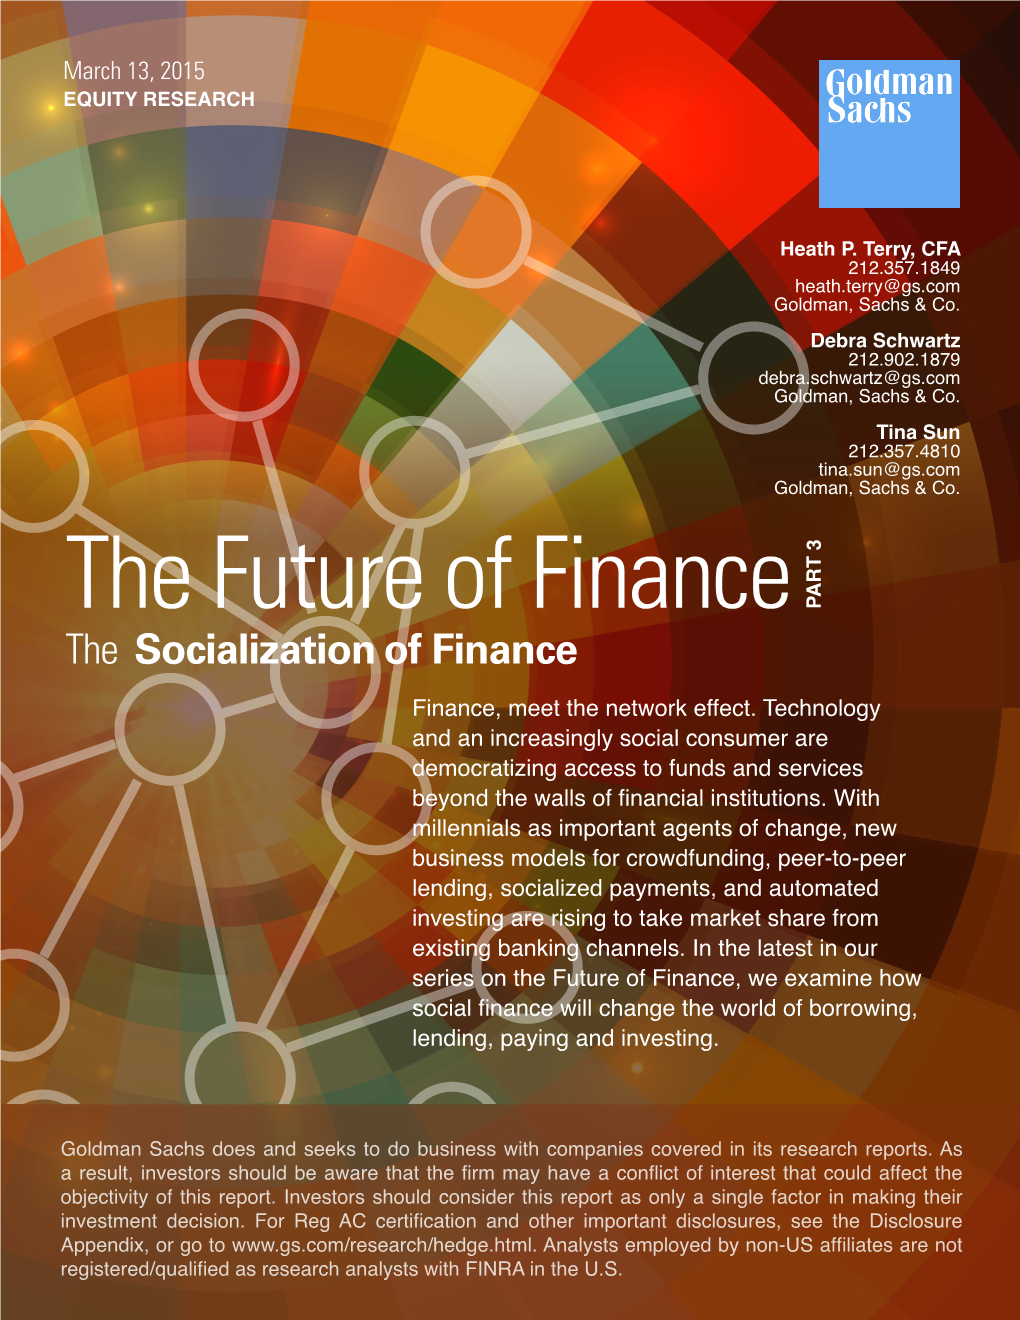 The Future of Finance 3 PART the Socialization of Finance